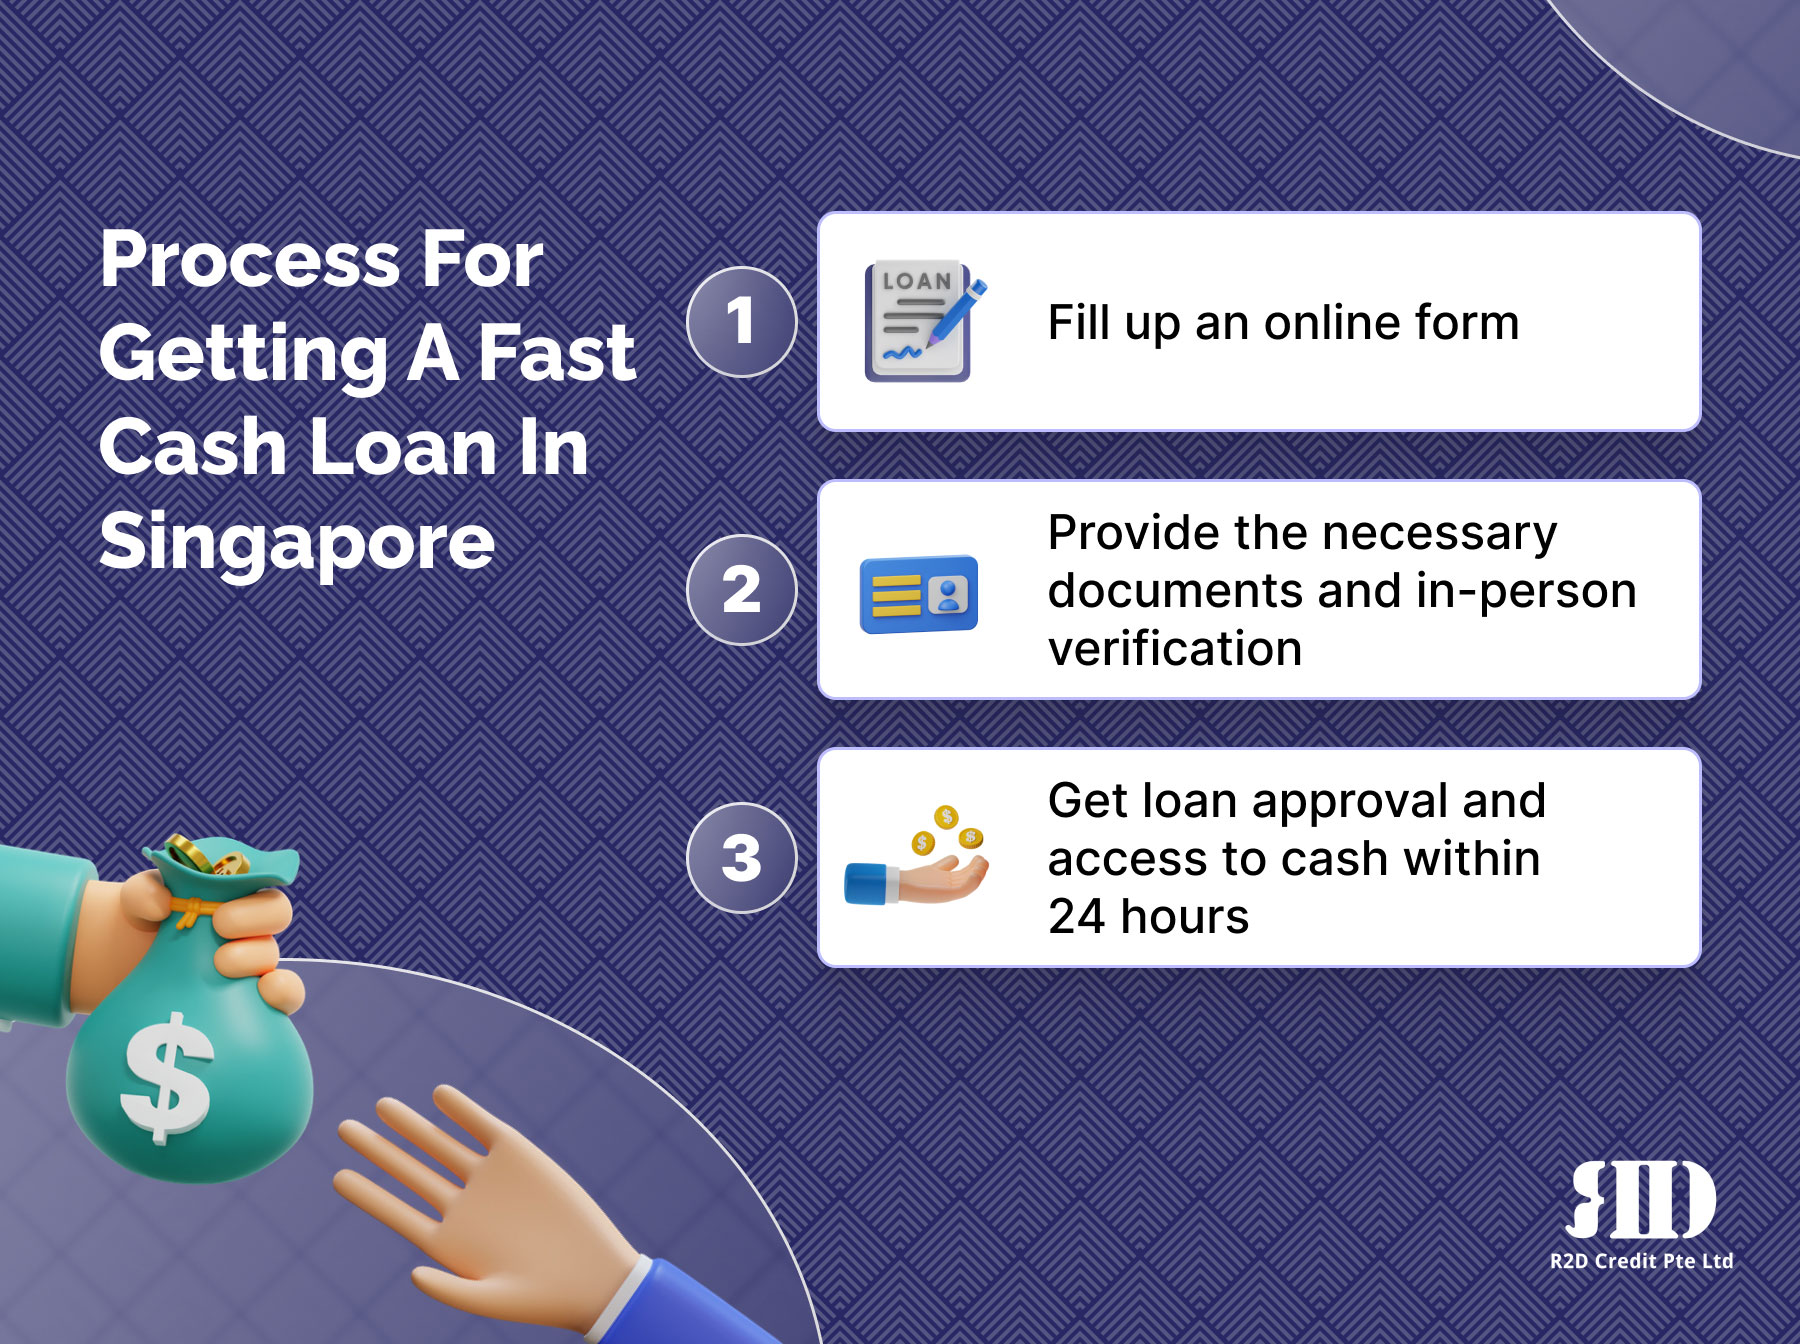 Process for getting a fast cash loan in Singapore